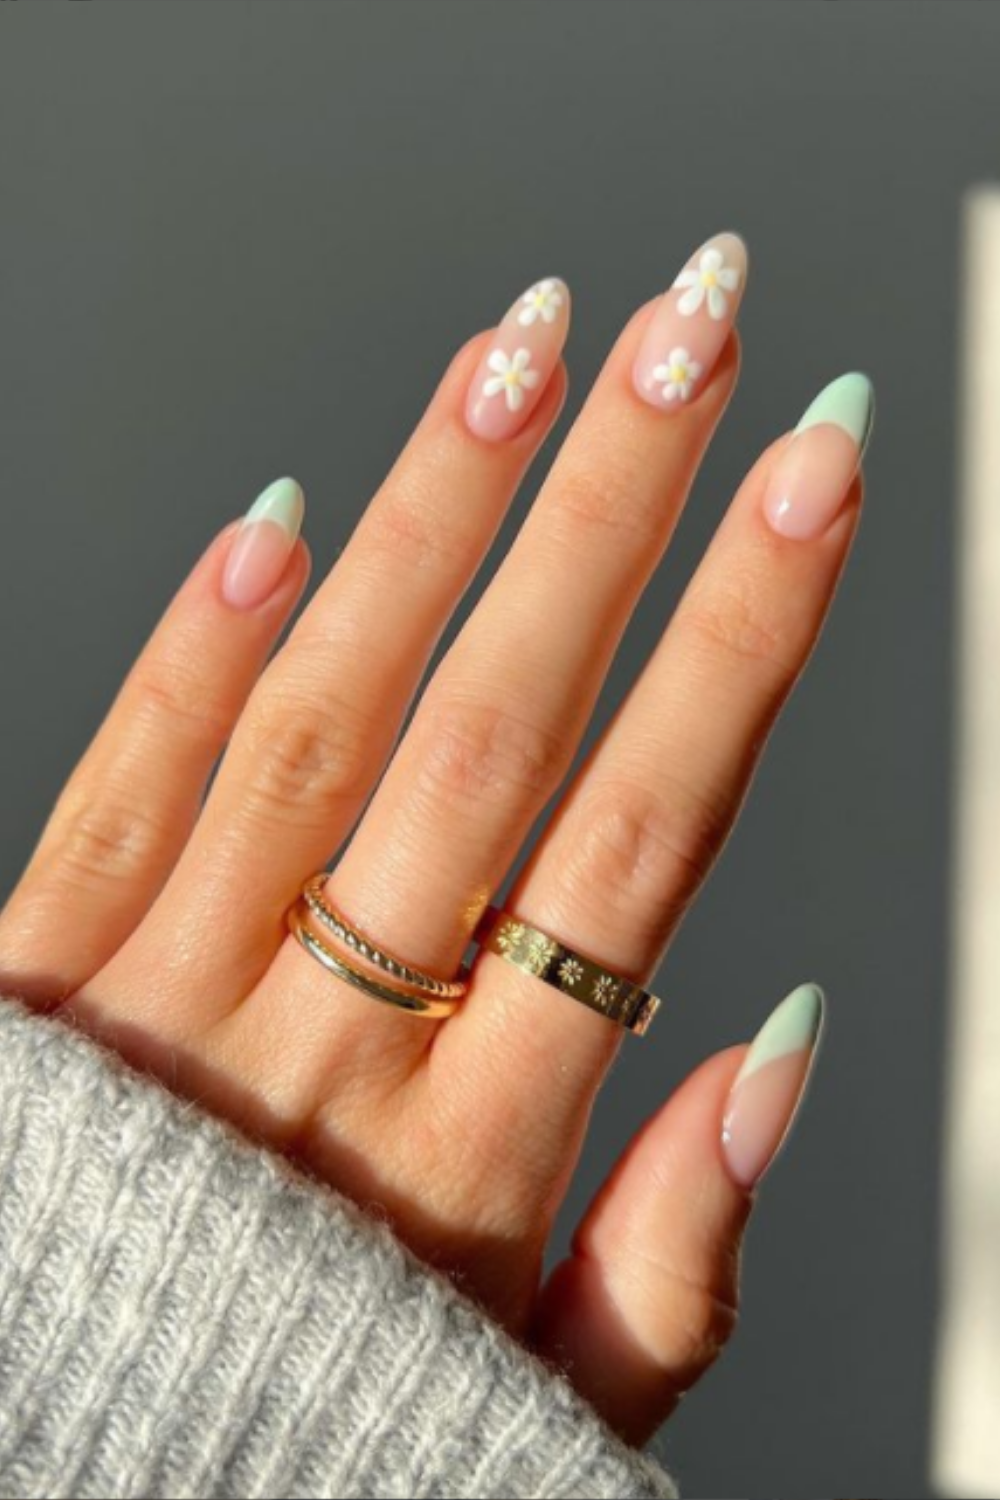 34 Clear Base Nail Designs To Try - Beauty Bay Edited